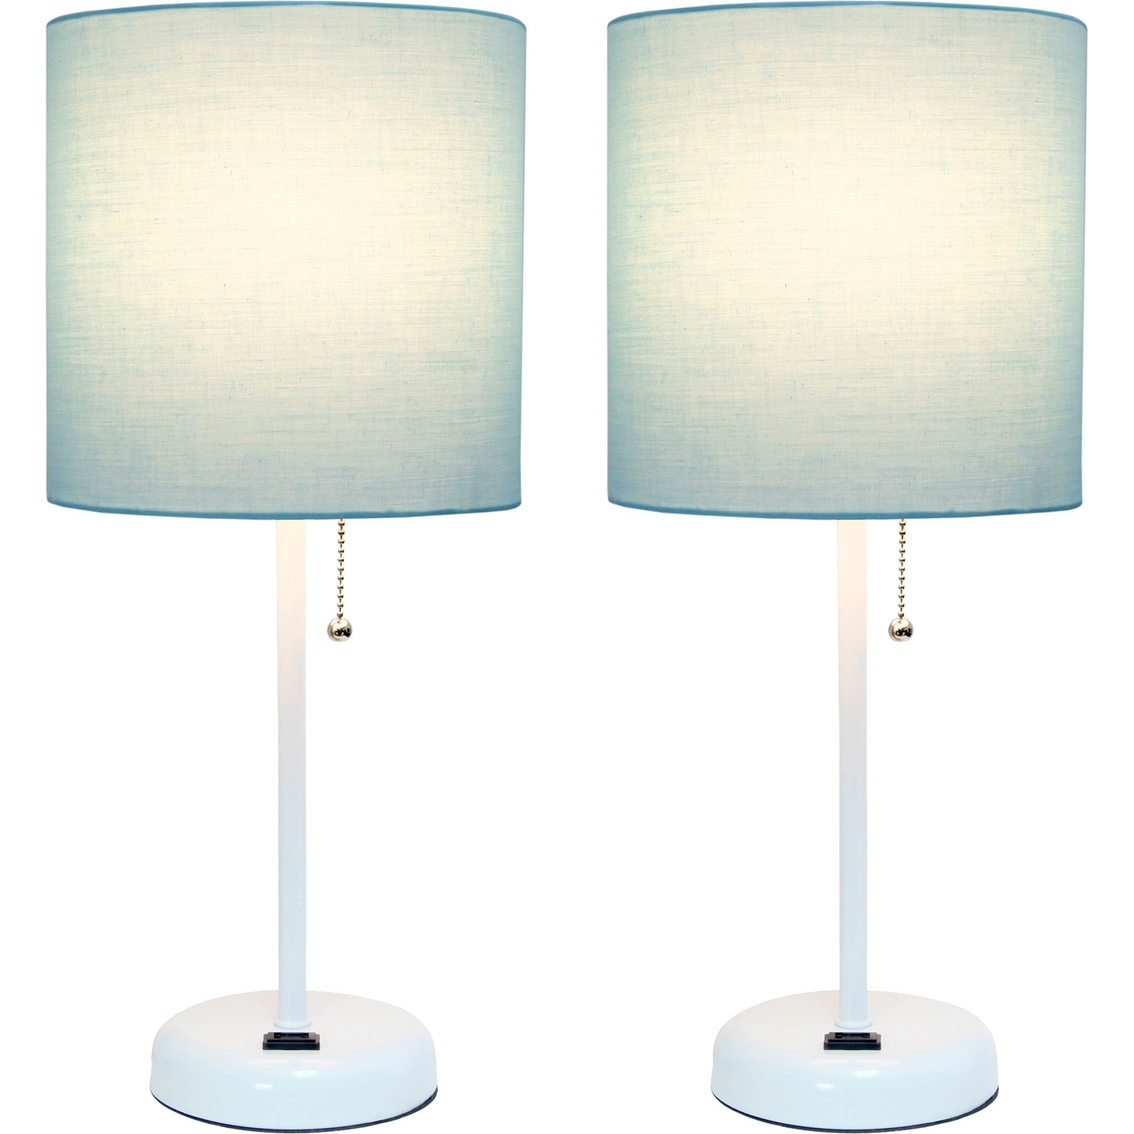 LimeLights 19.5 in. Stick Lamp with Charging Outlet Set of 2 - Image 2 of 3